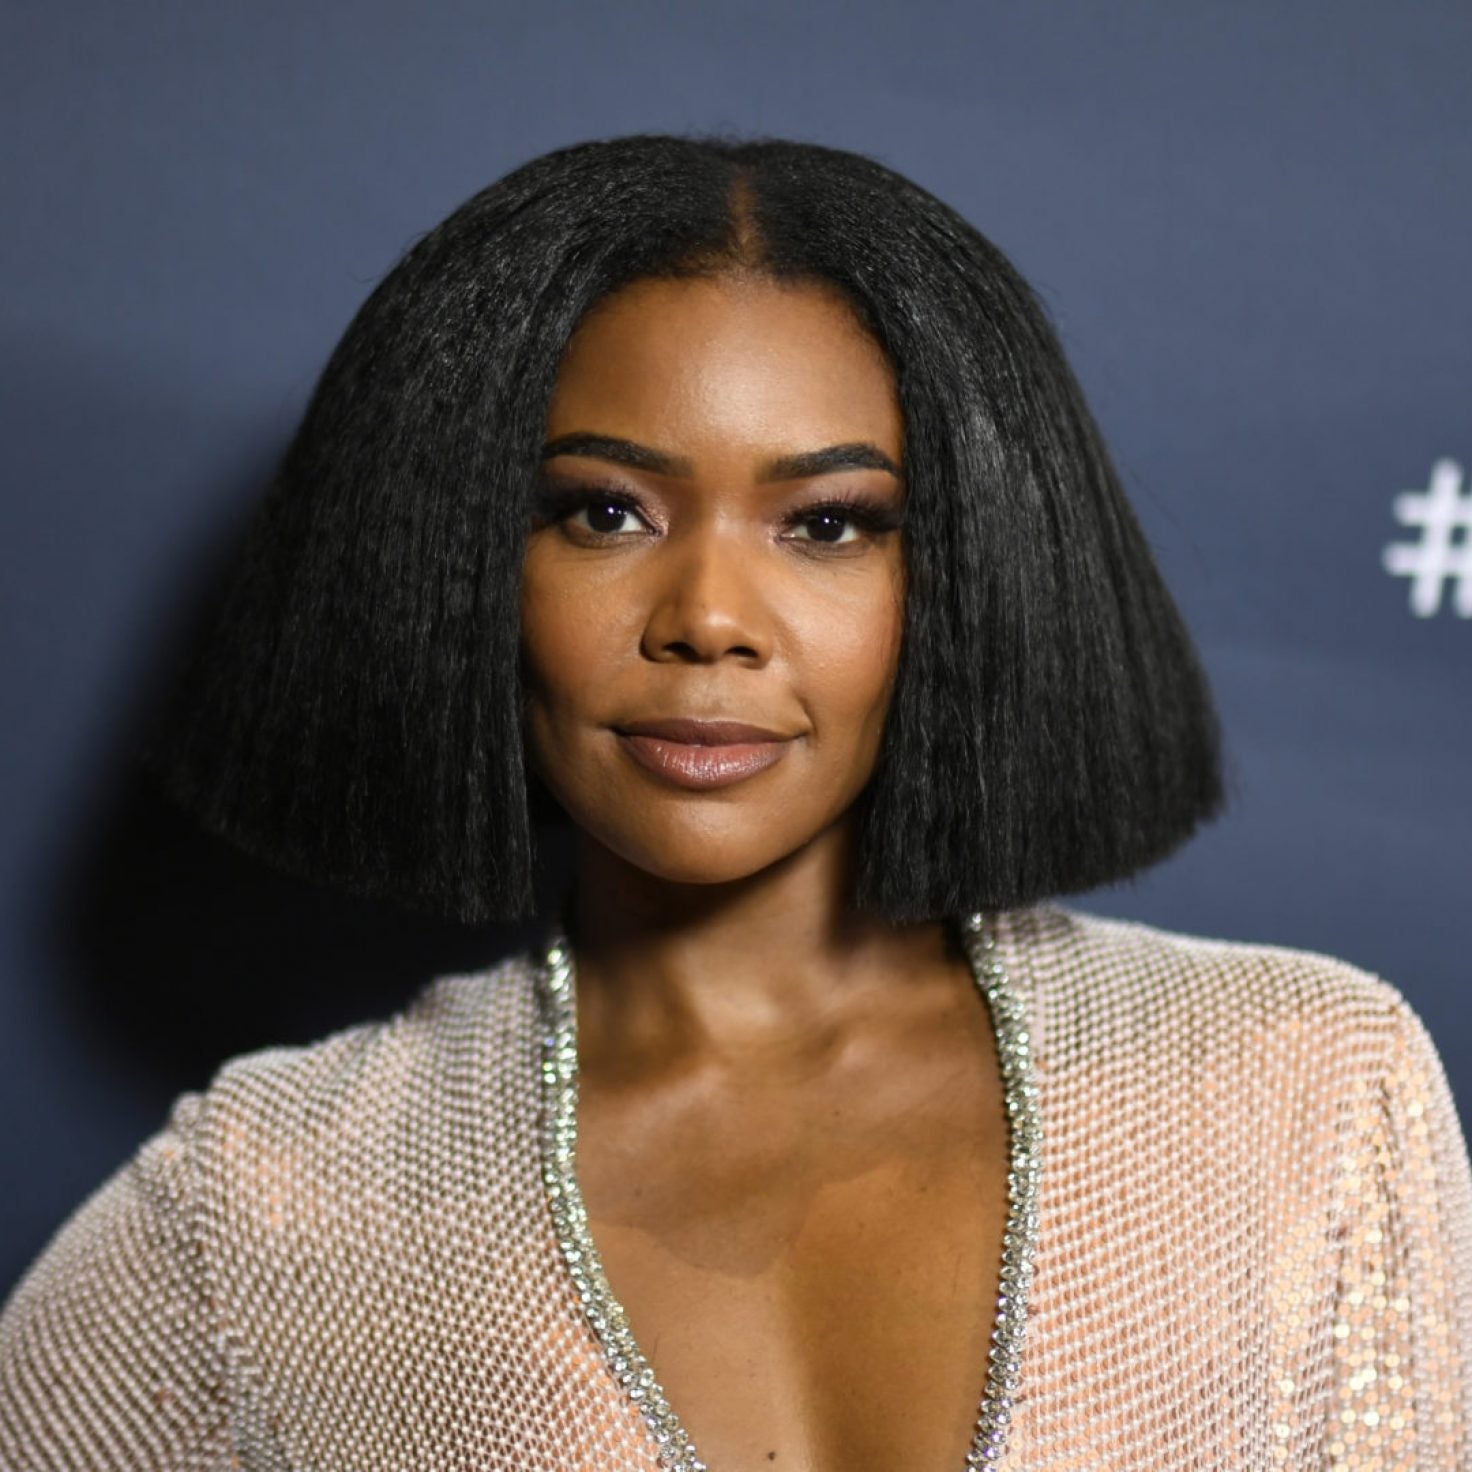 Gabrielle Union Claps Back At Terry Crews Saying 'America's Got Talent' Was 'Most Diverse'